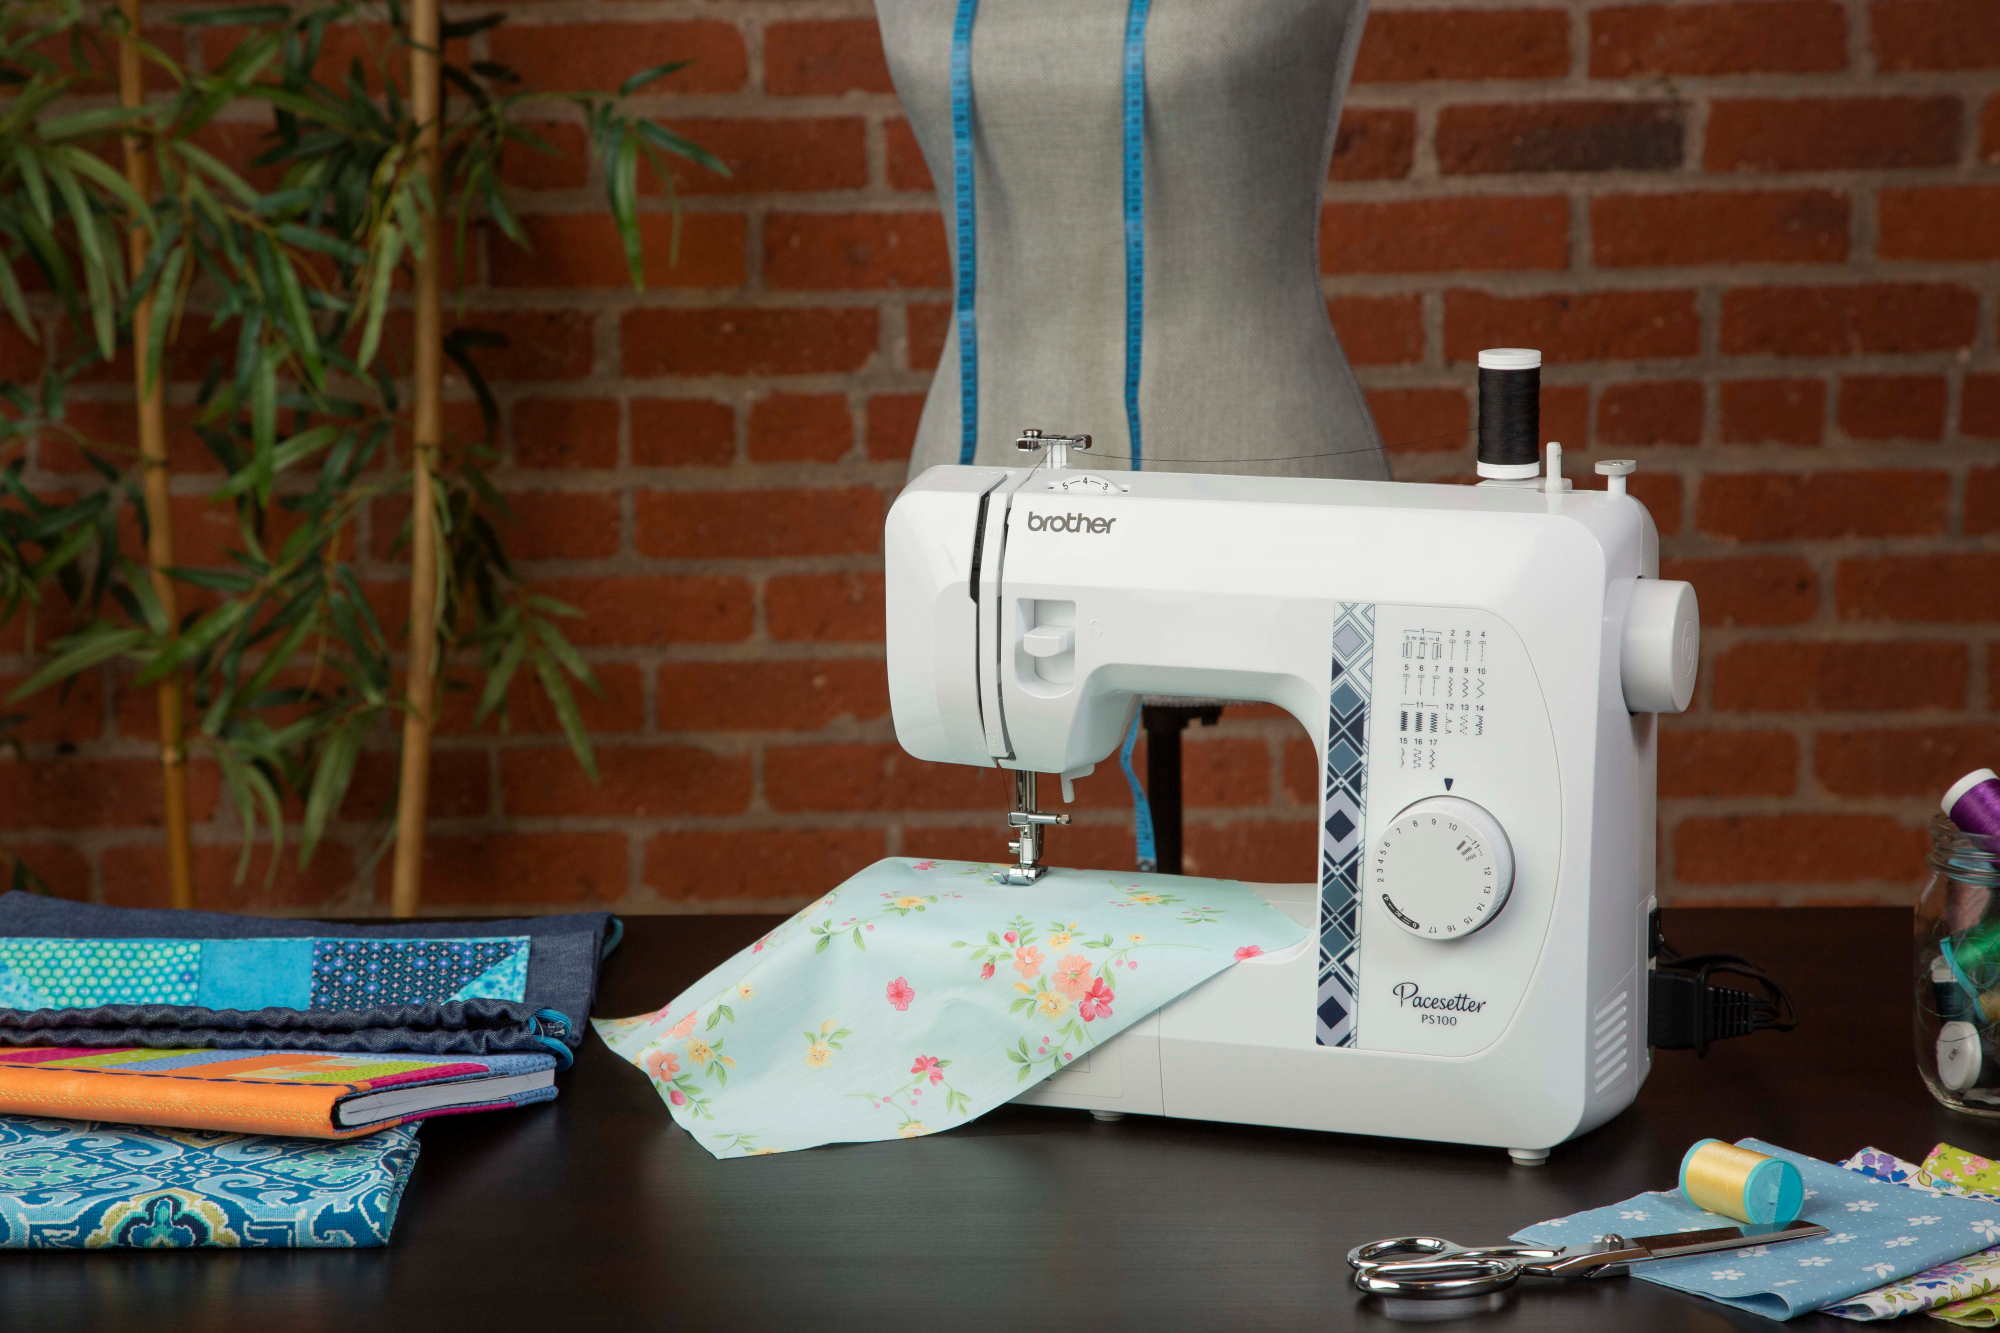 image of the Brother Pacesetter PS100 Sewing and Quilting Machine on a table with a sewing example and sewing supplies